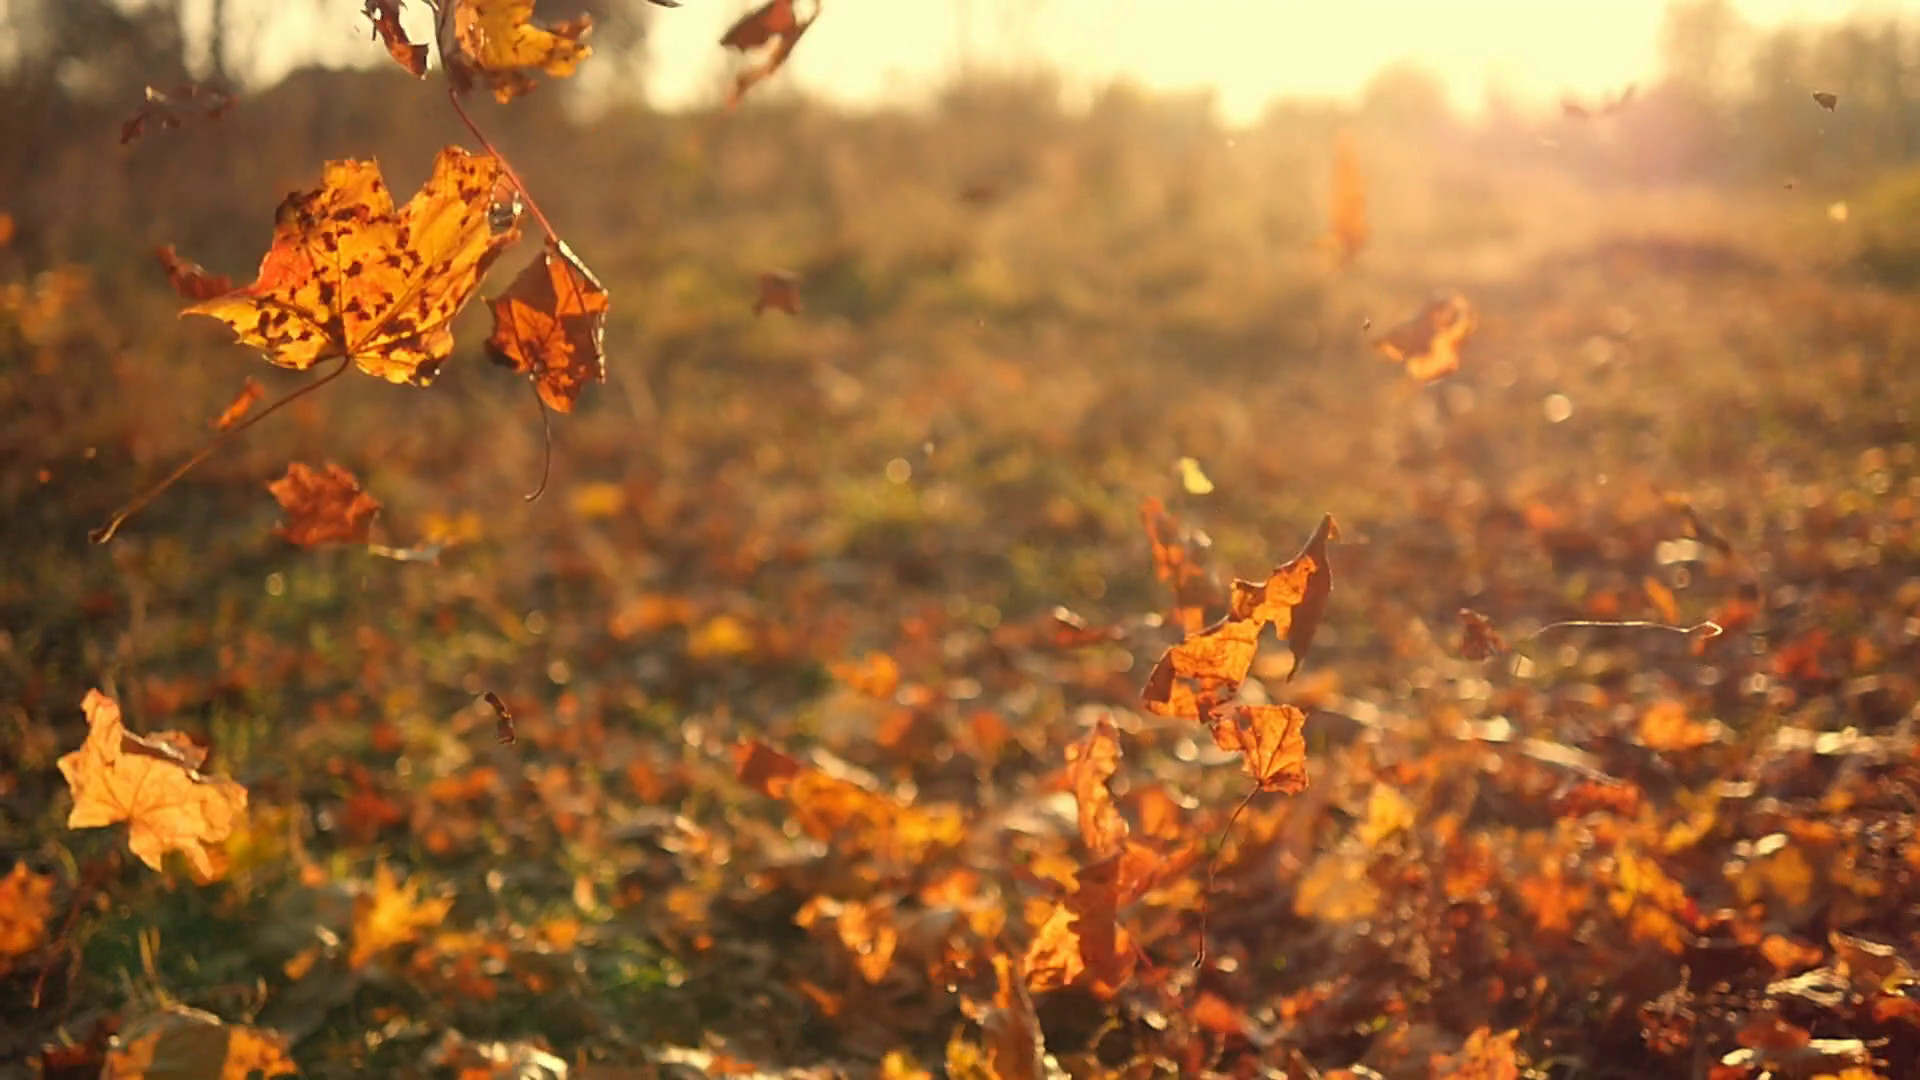 1920x1080 Autumn leaves falling in slow motion and sun shining through fall leaves.  Beautiful landscape background. Stock Video Footage - Storyblocks Video